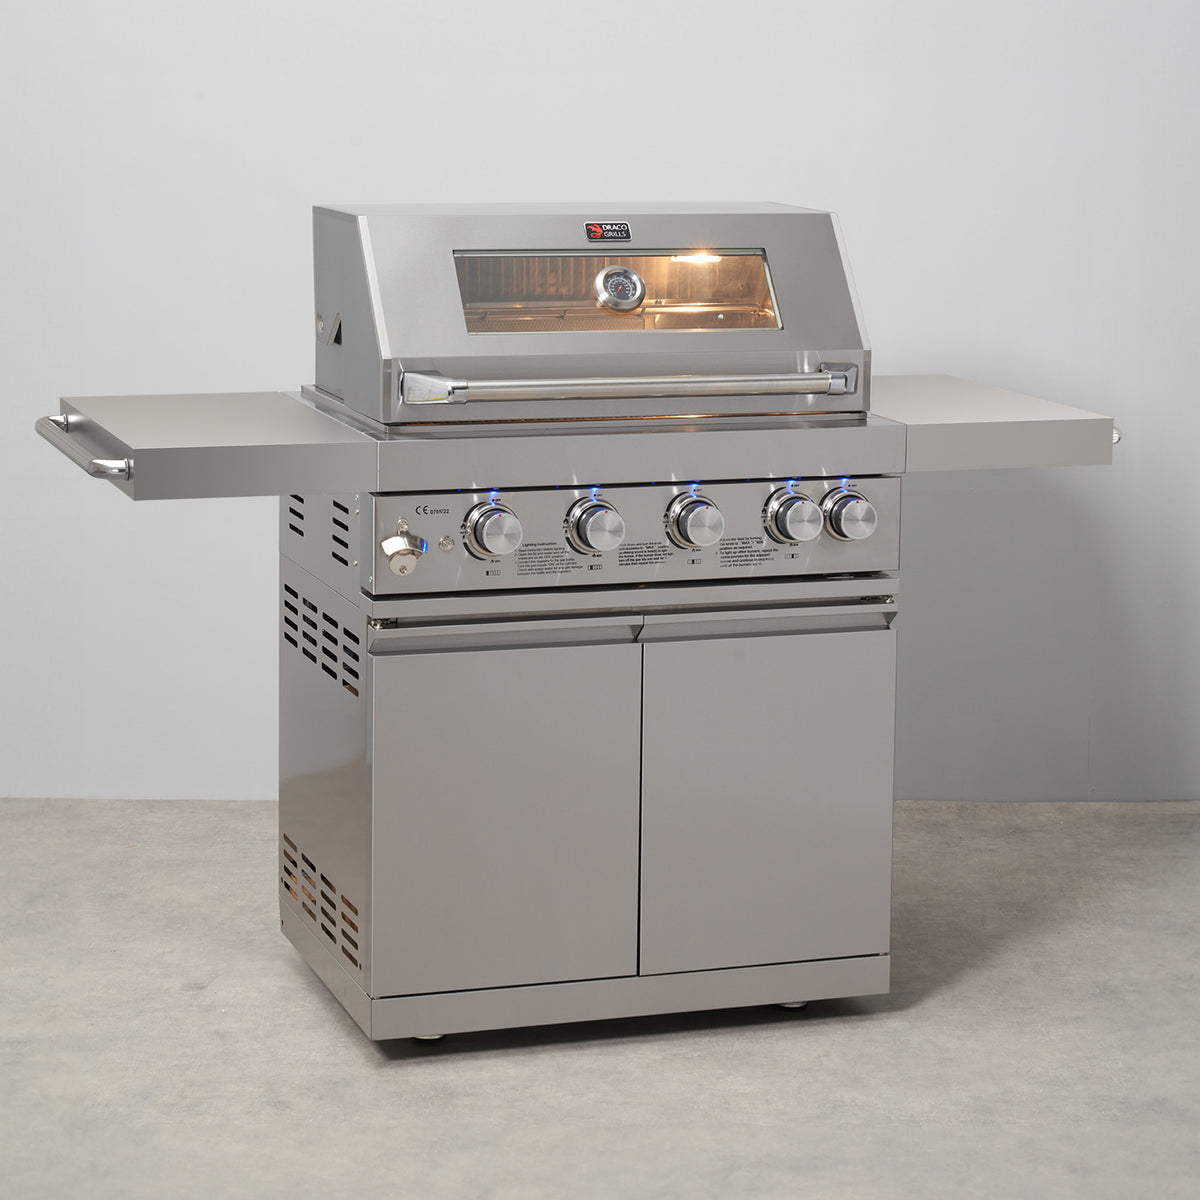 Draco Grills Z440 Deluxe 4 Burner Stainless Steel Gas Barbecue with Cabinet